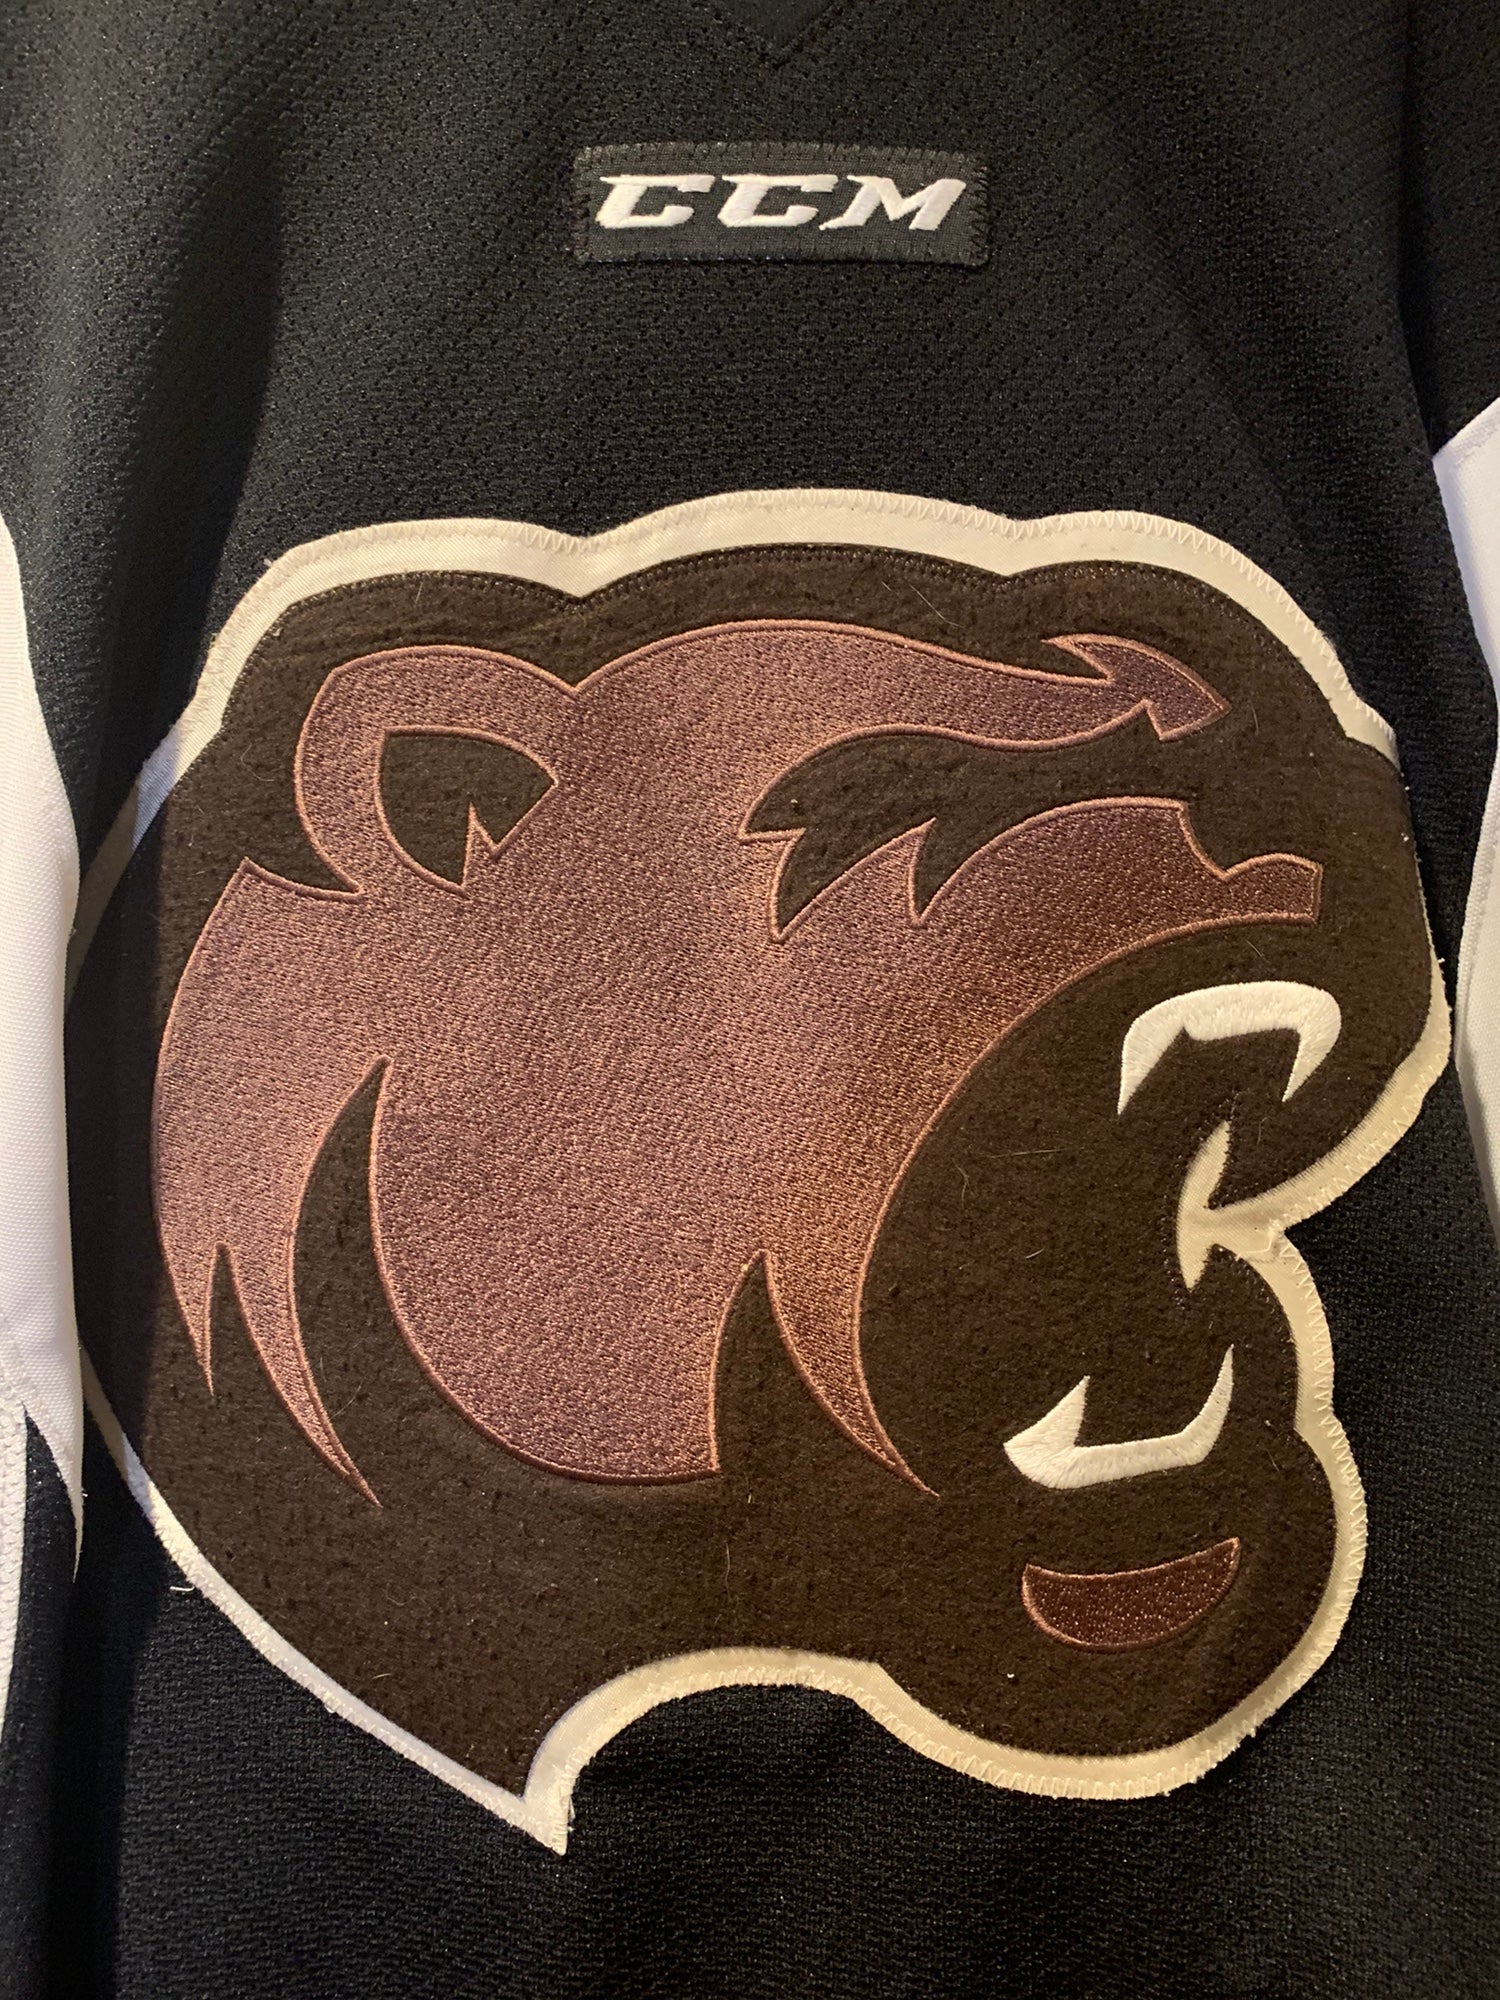 Replica Chocolate-Covered Hershey Bears Jerseys Are Now Available